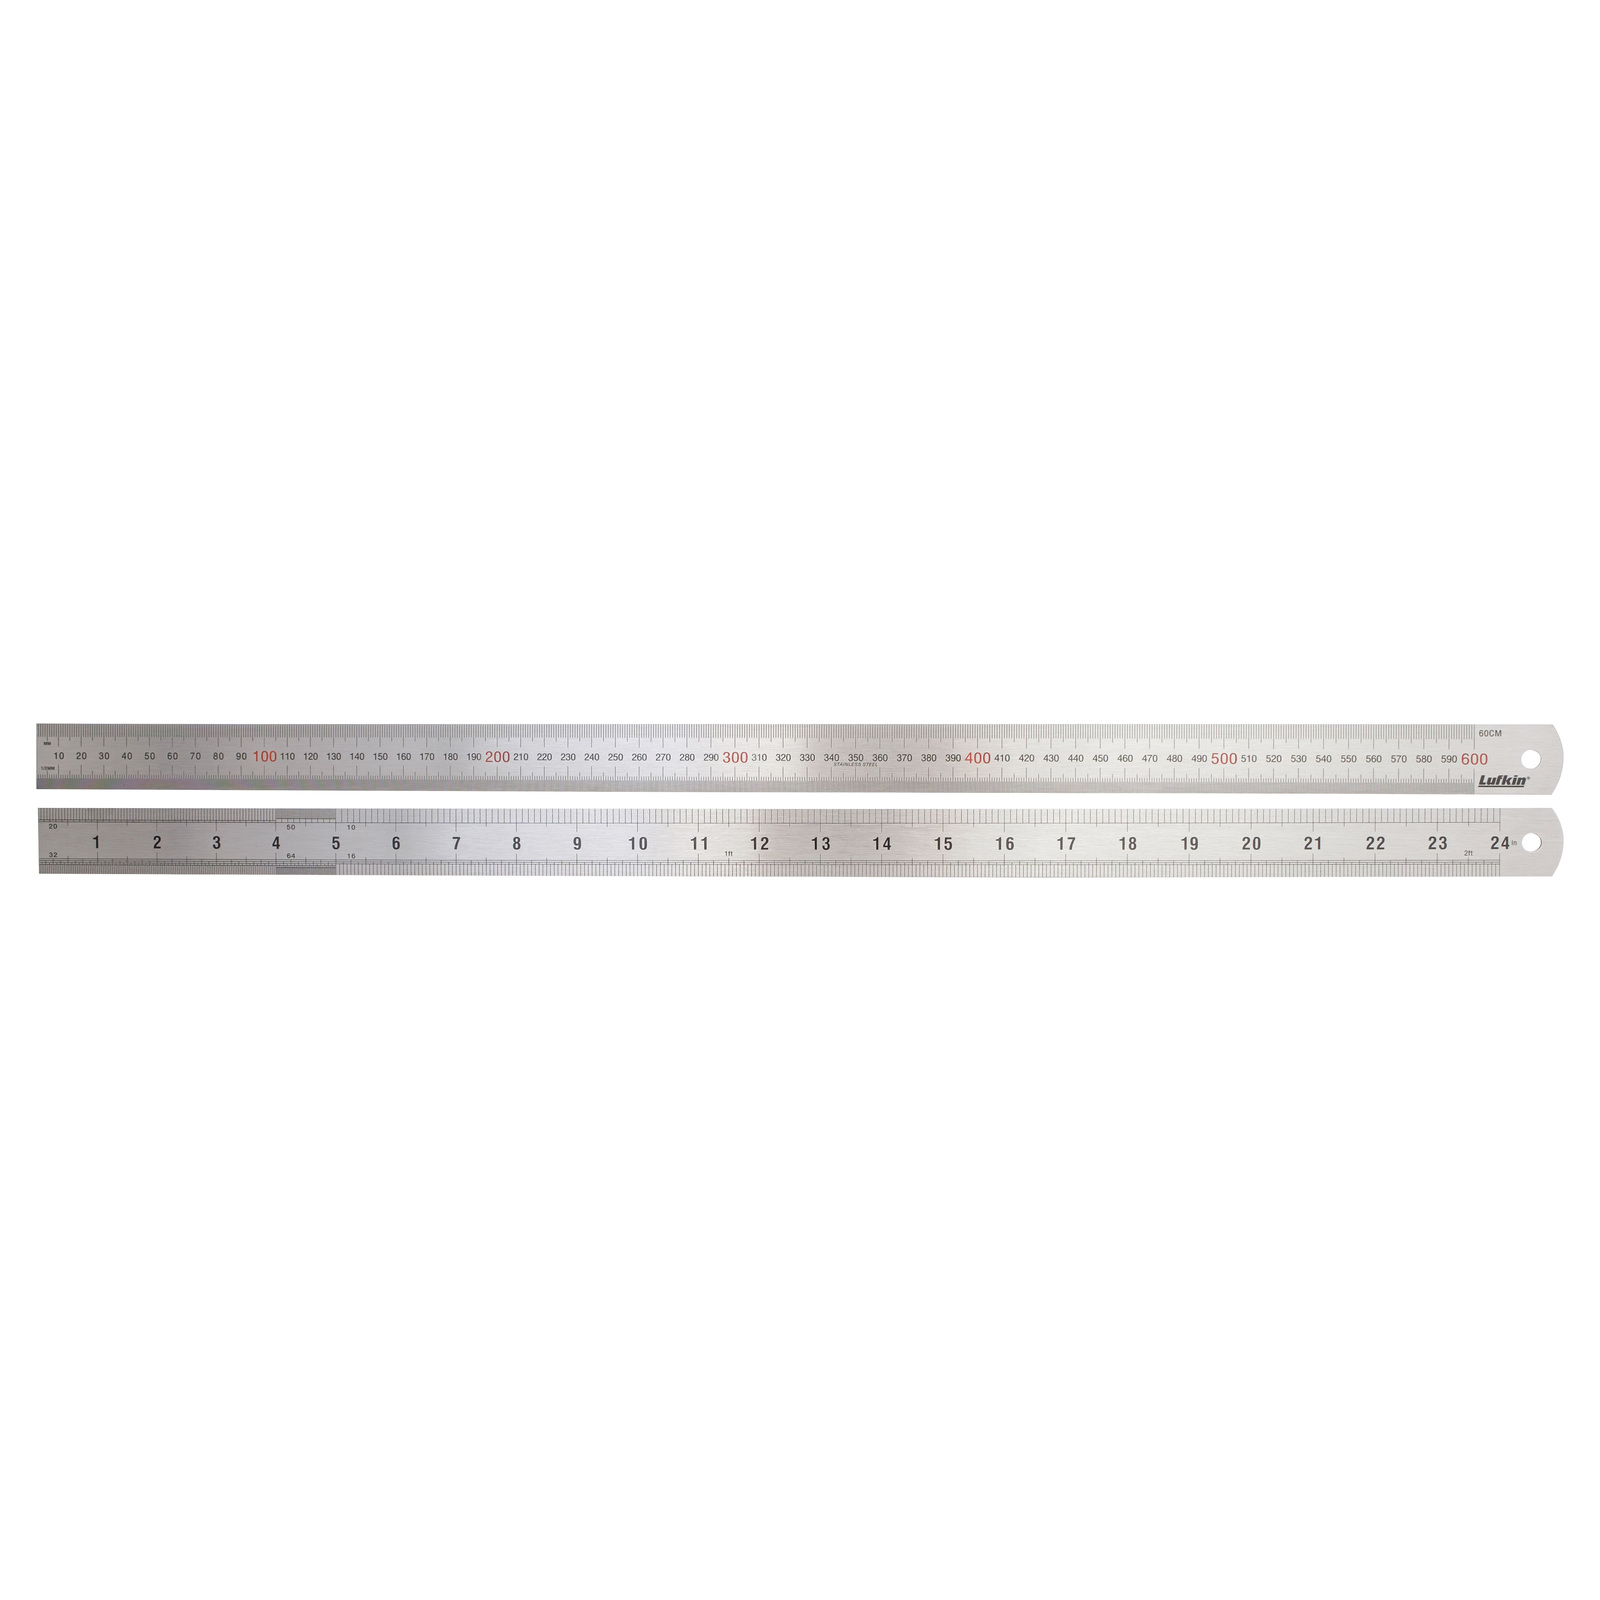 600mm Double-Sided Scale with Metric and Imperial Markings Règle Acier Inoxydable avec Graduations métriques 600 mm Lufkin LSR600 Precision Stainless Steel Ruler Argenté 